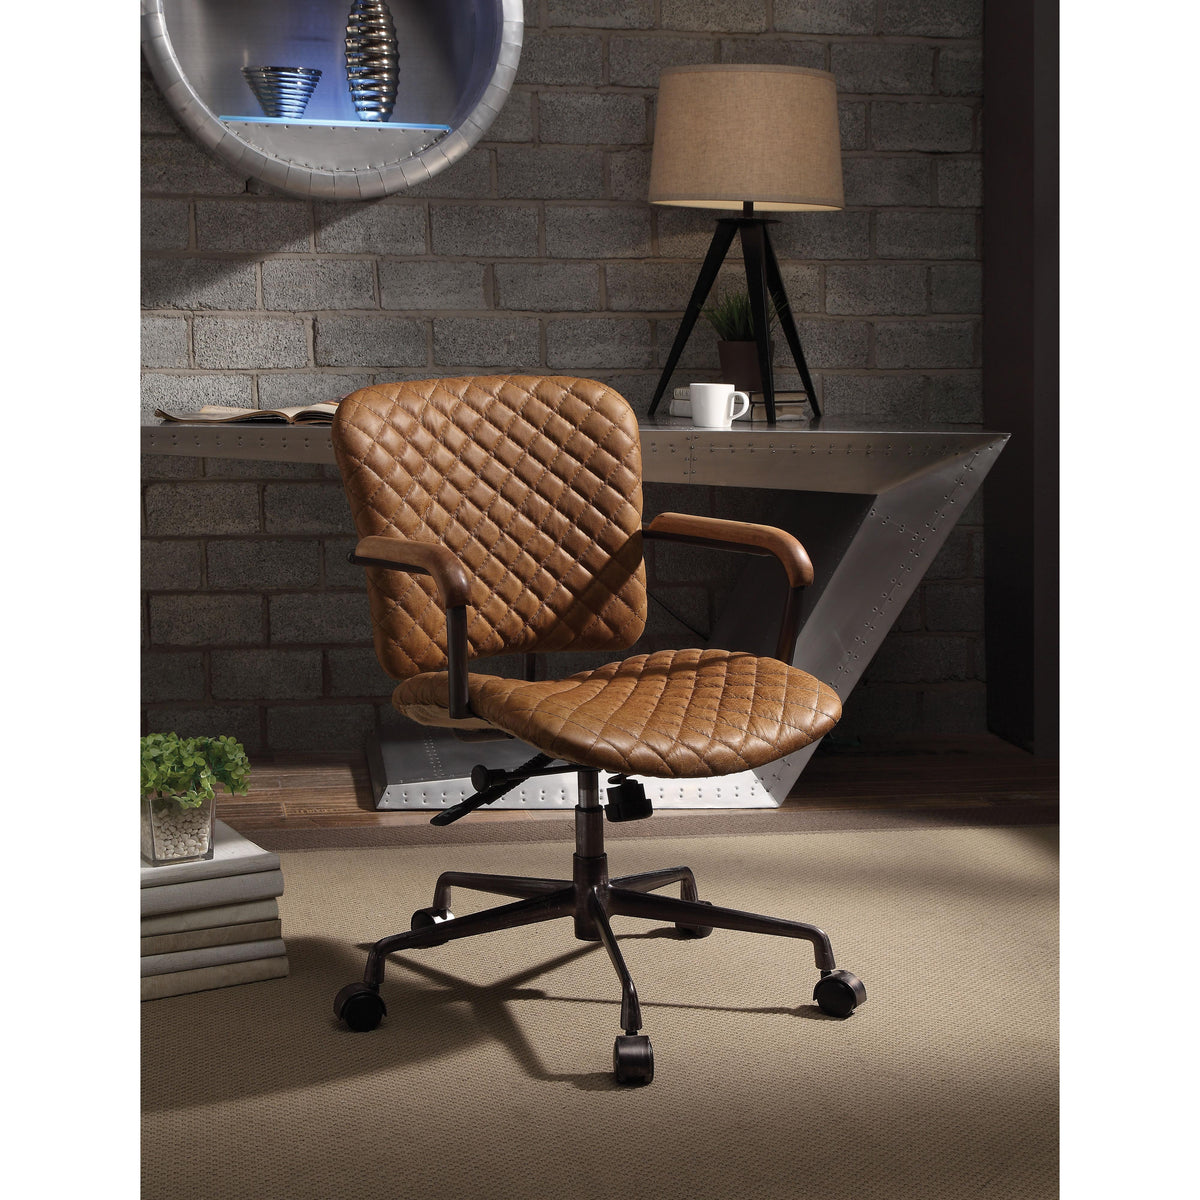 Acme Furniture 92029 Executive Office Chair